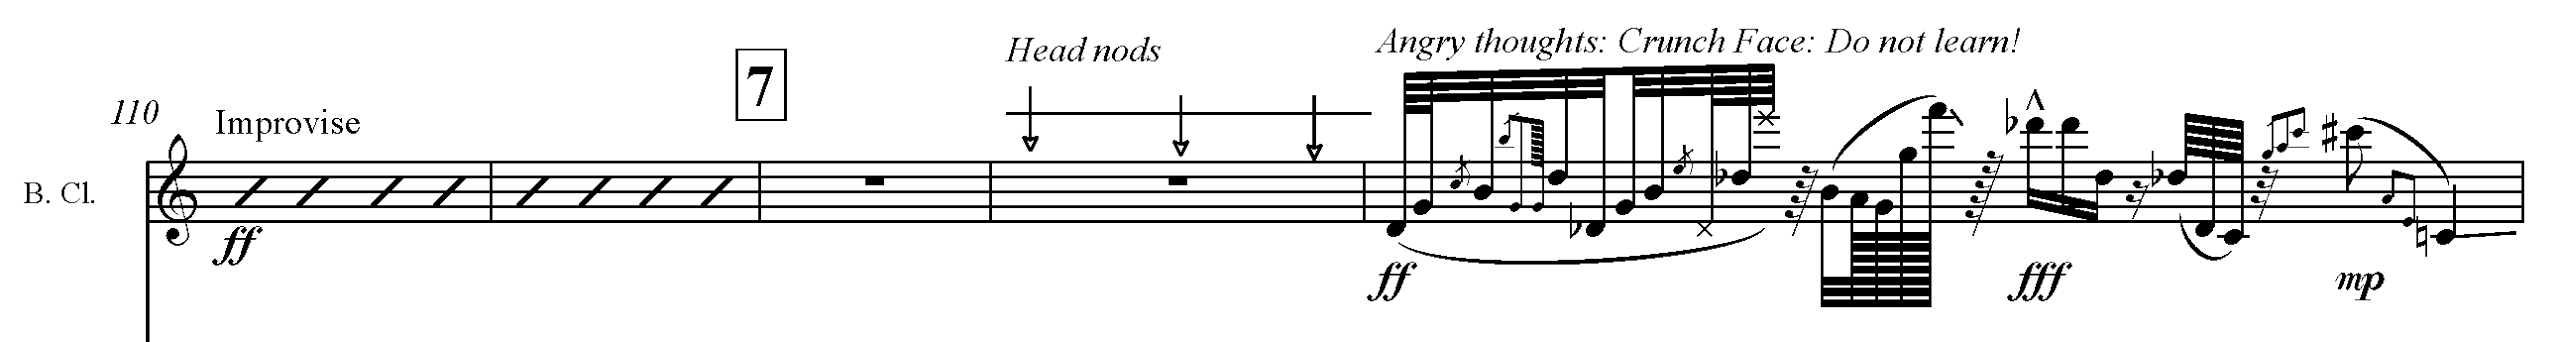 Image of a line from sheet music showing both the musical notes and the facial expressions to be used in performance of the piece